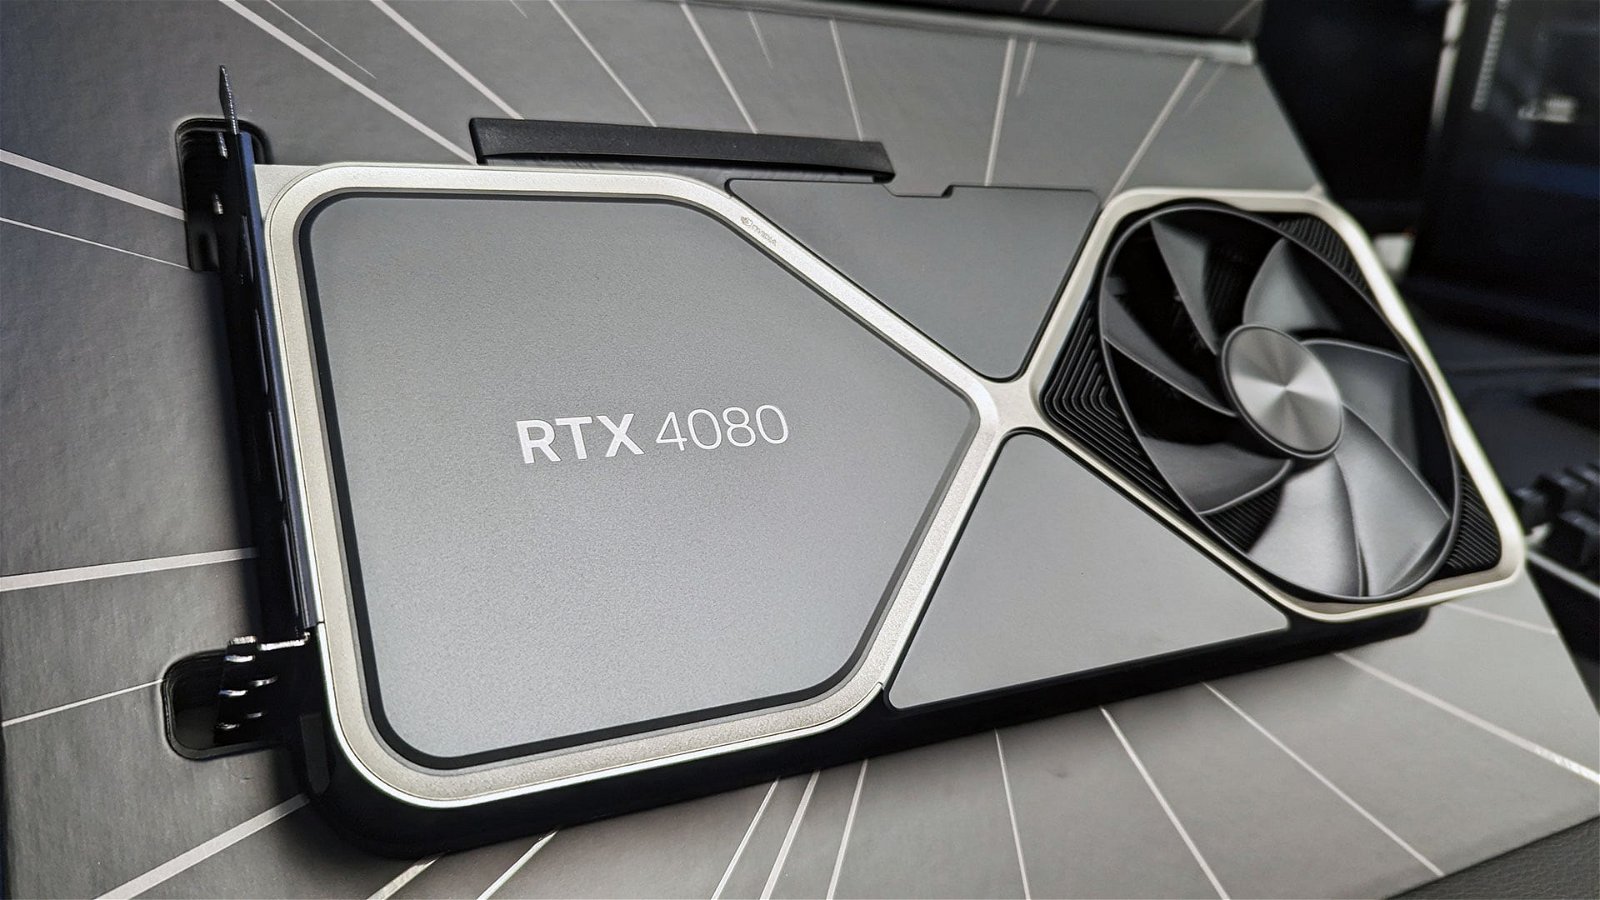 https://cdn.cgmagonline.com/wp-content/uploads/2022/11/geforce-rtx-4080-founders-edition-review-396410.jpg